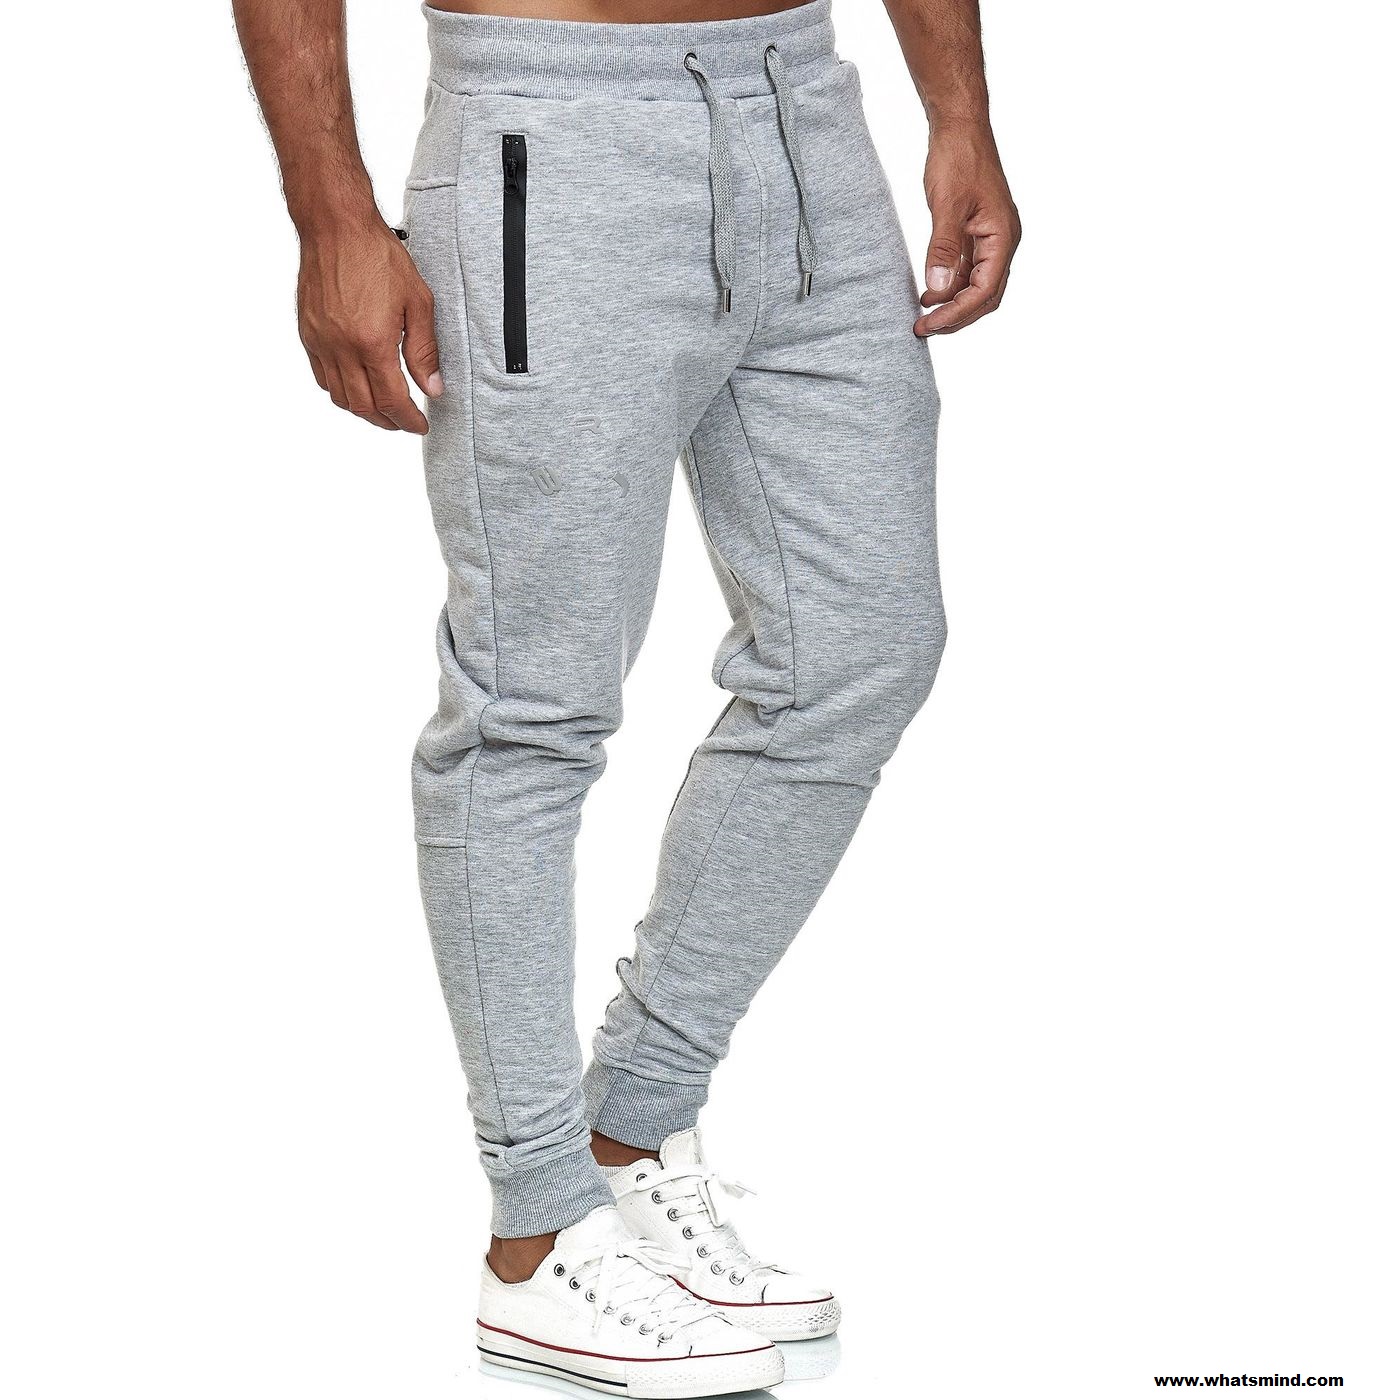 5 types of pants every guy should own - Whatsmind